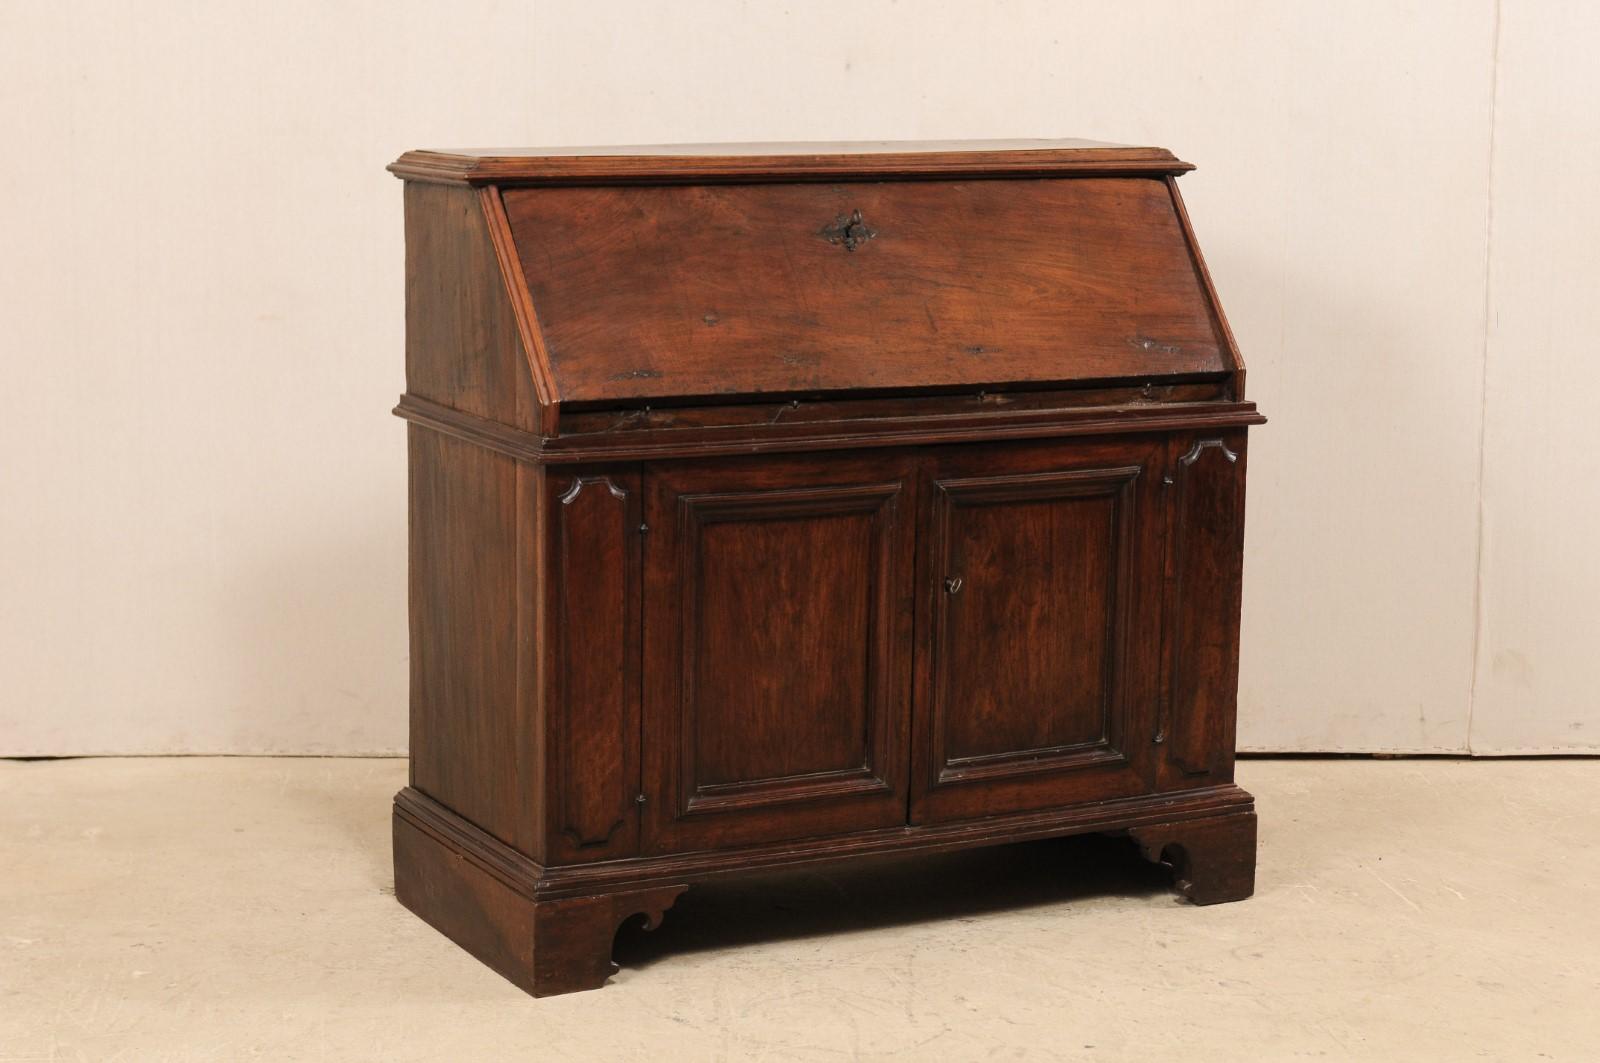 A handsome Italian drop-front secretary cabinet from the 18th century. This antique bureau of walnut wood from Italy features a slanted fall front door, which opens to reveal a nice writing surface and interior display of six compartments. Below the